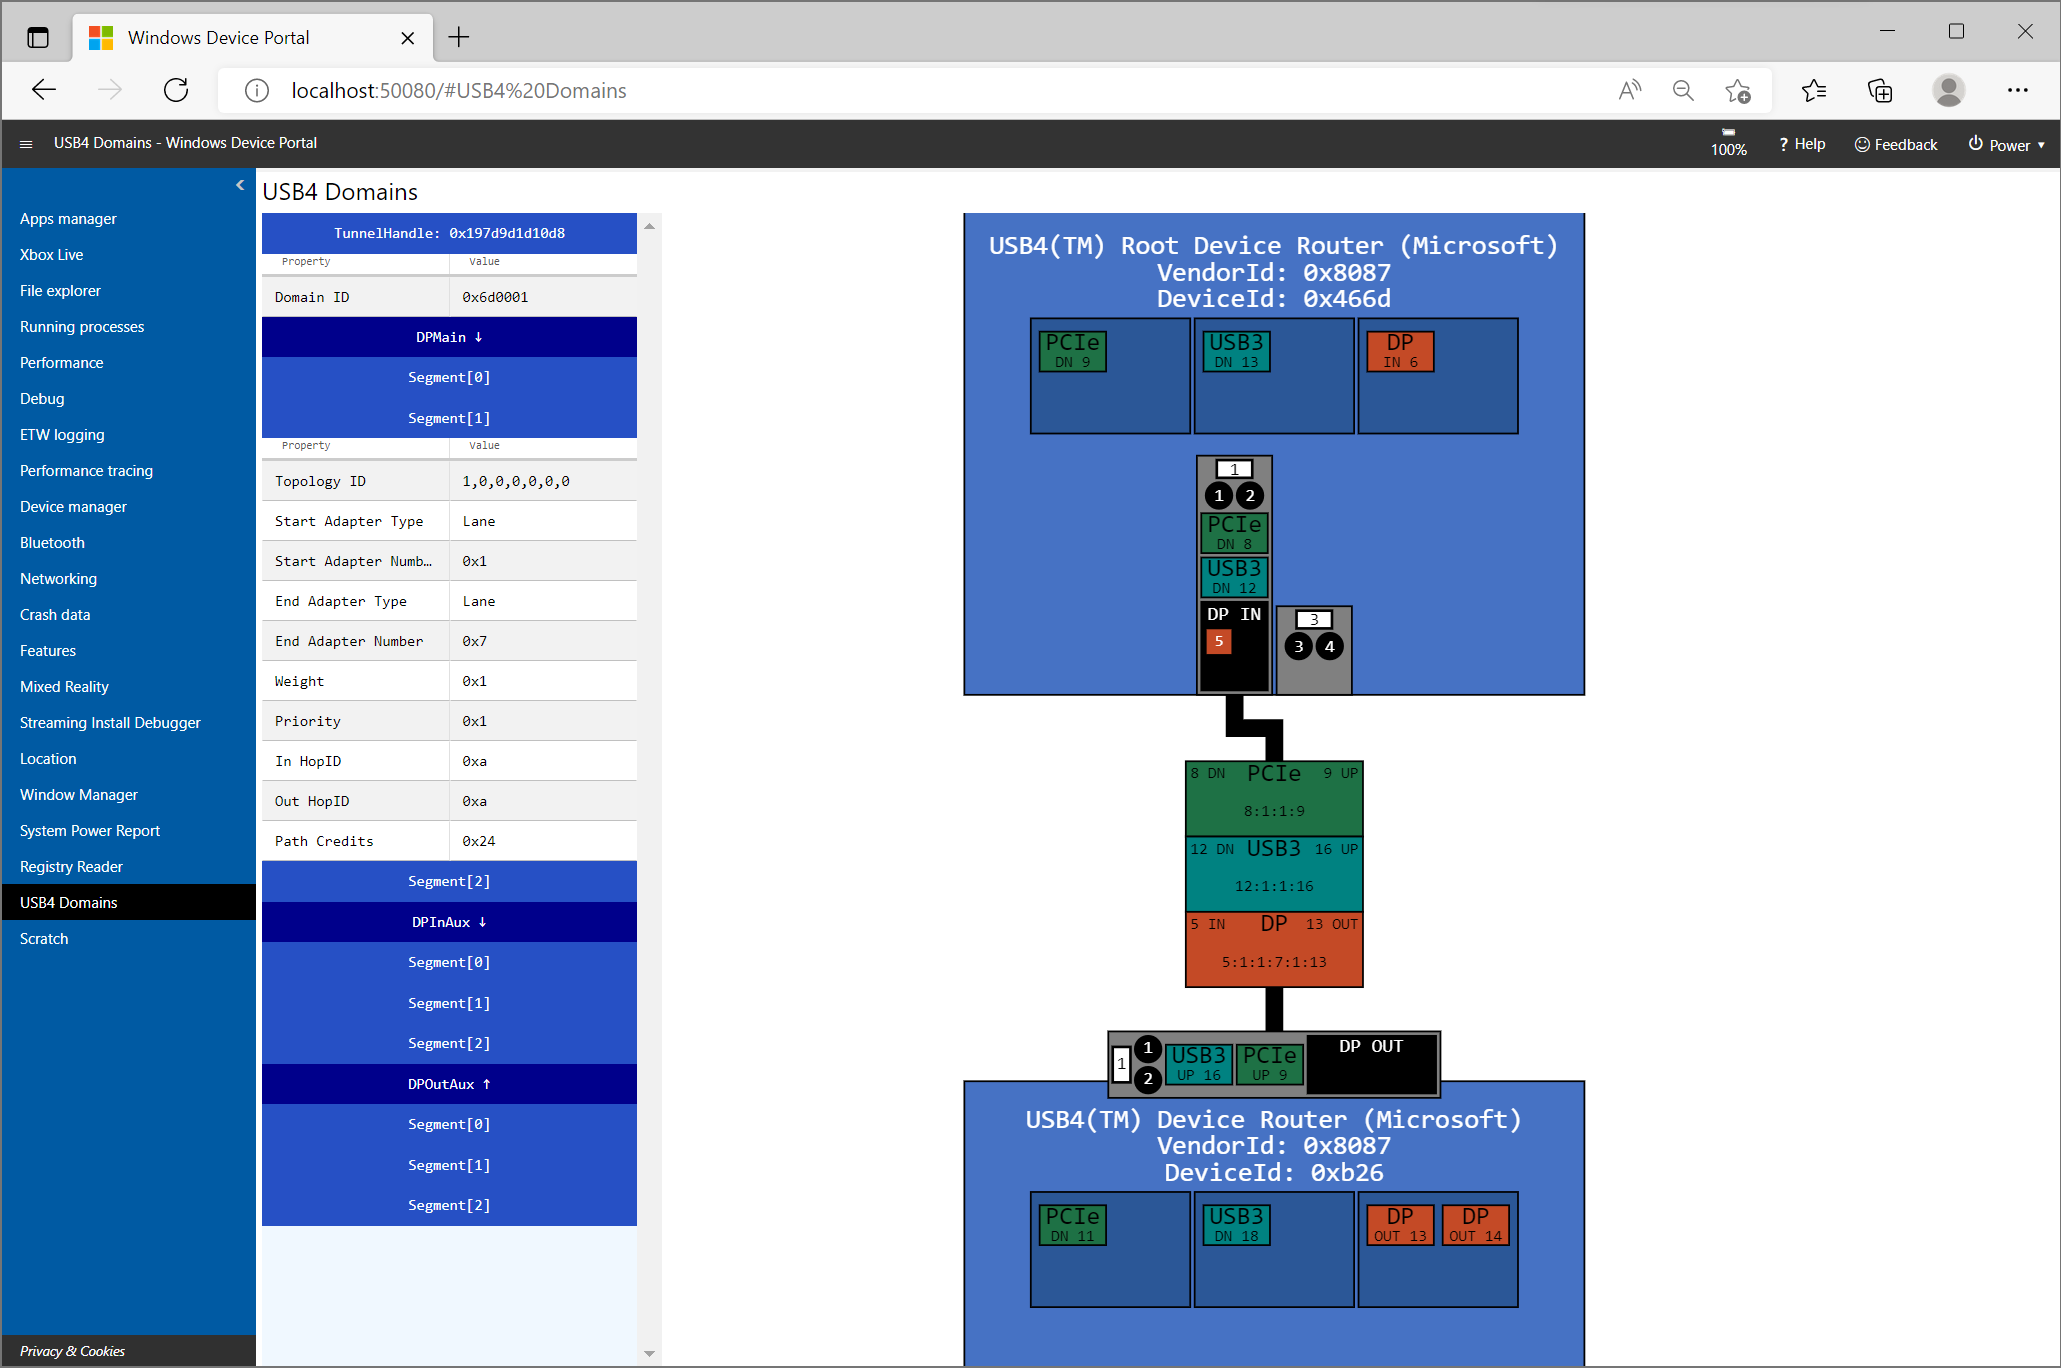 Screenshot of Windows Device Portal showing details of a tunnel between USB4 device routers.